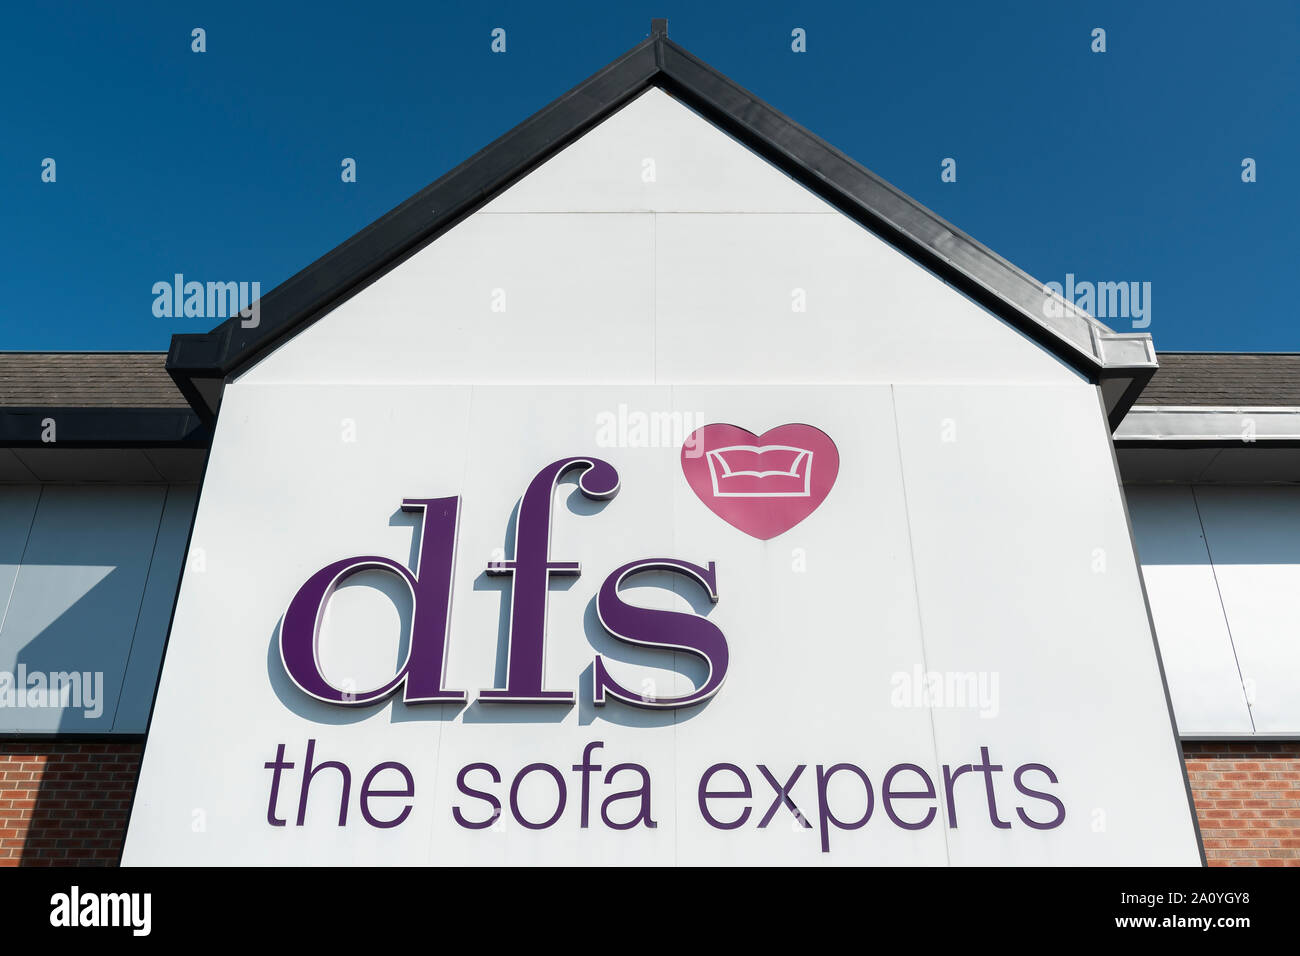 Dfs Stock Photos, Royalty Free Dfs Images